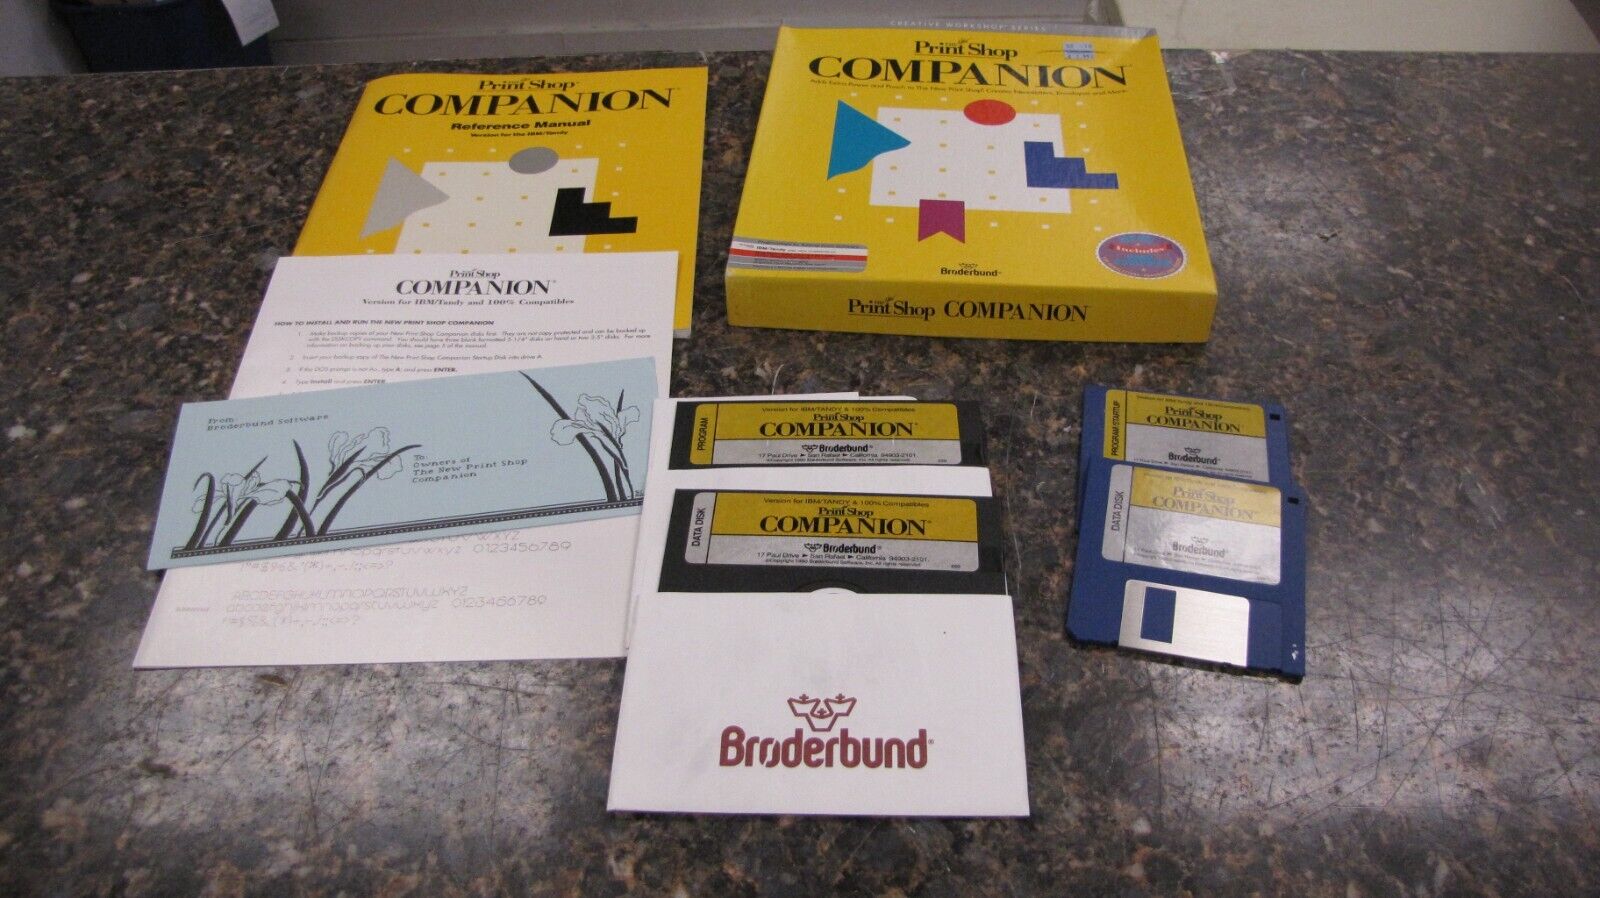 Vintage The New Print Shop Companion by Broderbund for IBM and Tandy